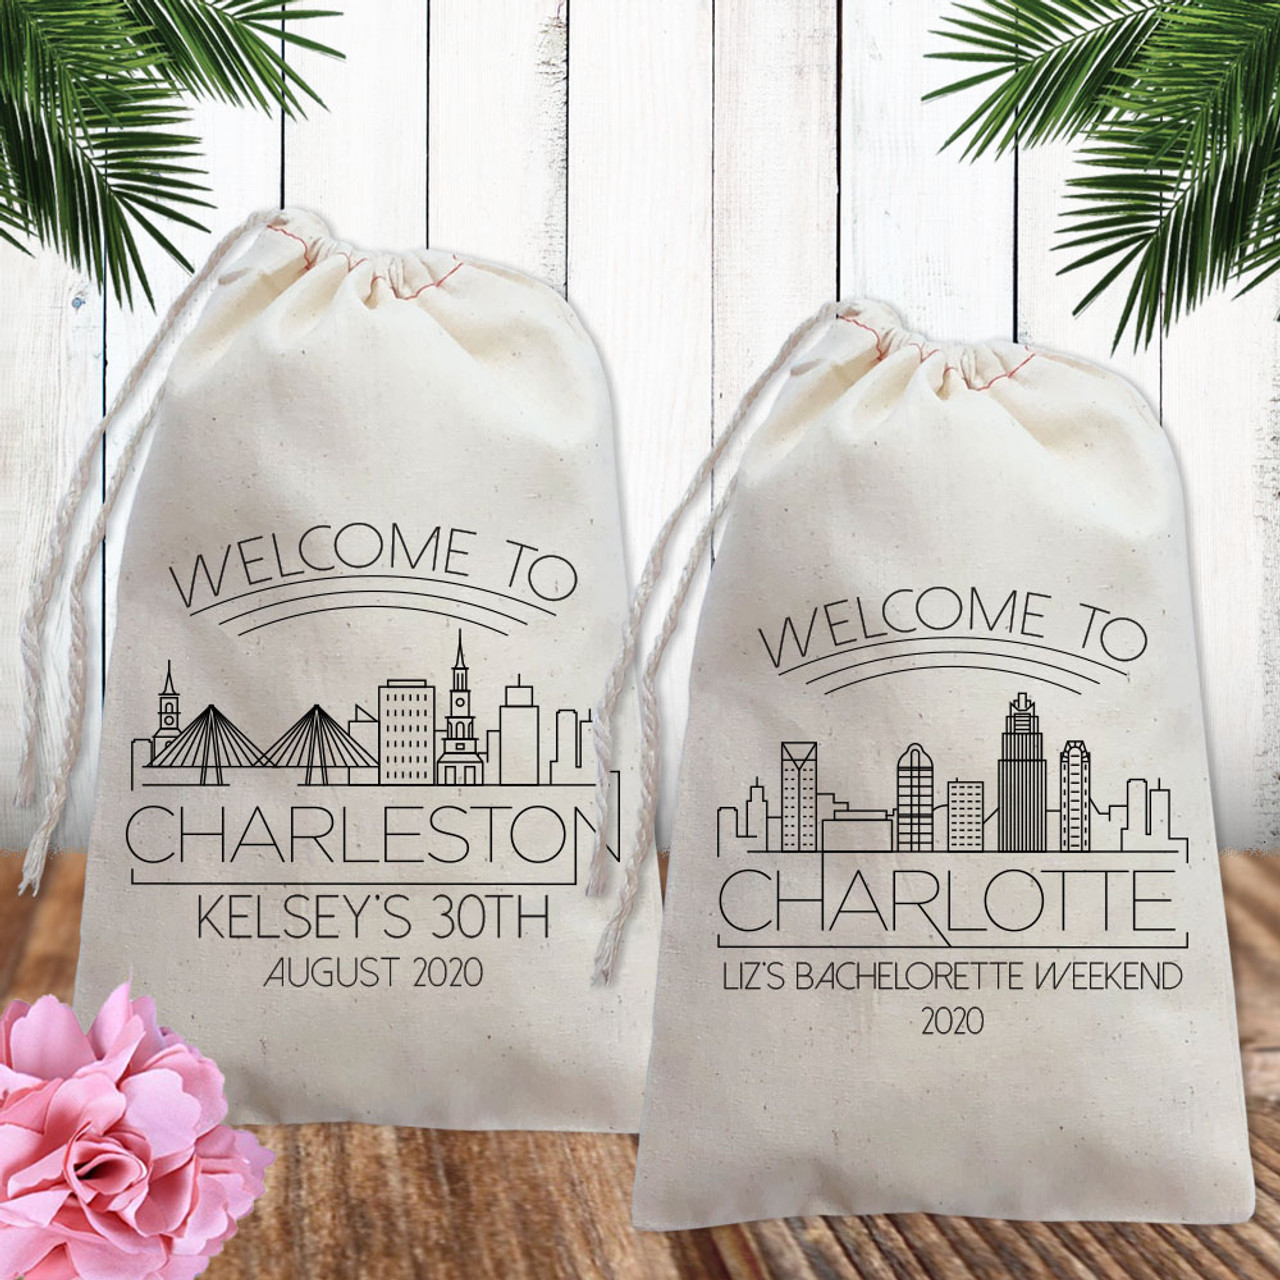 Wedding Stickers Wedding Welcome Stickers Welcome Labels Welcome to Our  Wedding Out of Town Guests Hotel Gift bag label Geometric Greenery